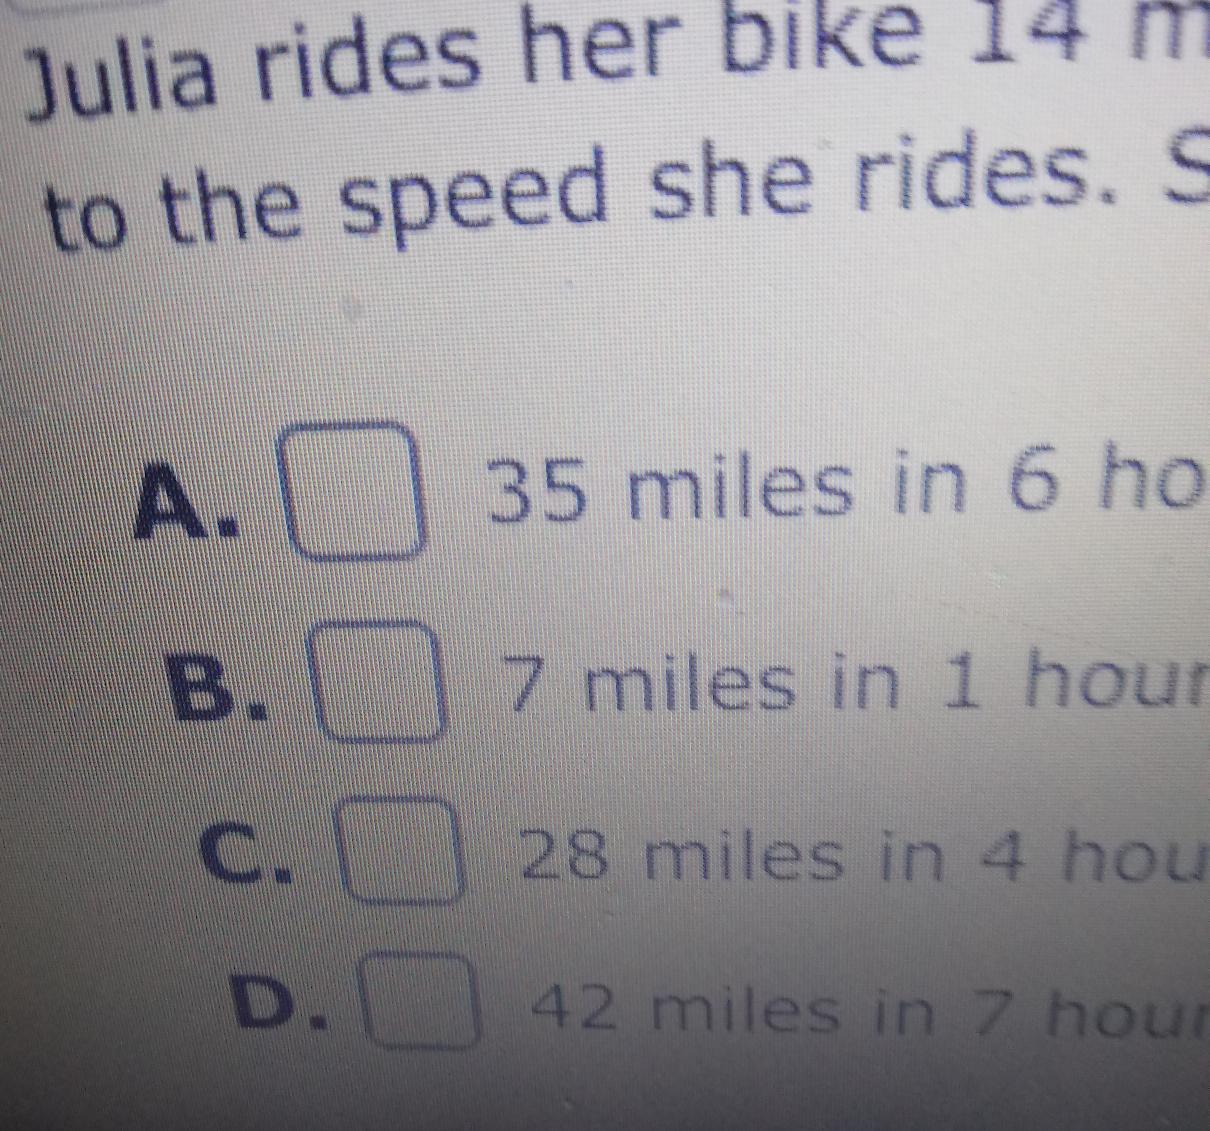 Julia Rides Her Bike 14 Miles In 2 Hours. If She Rides At A Constant Speed, Select The Answers Below